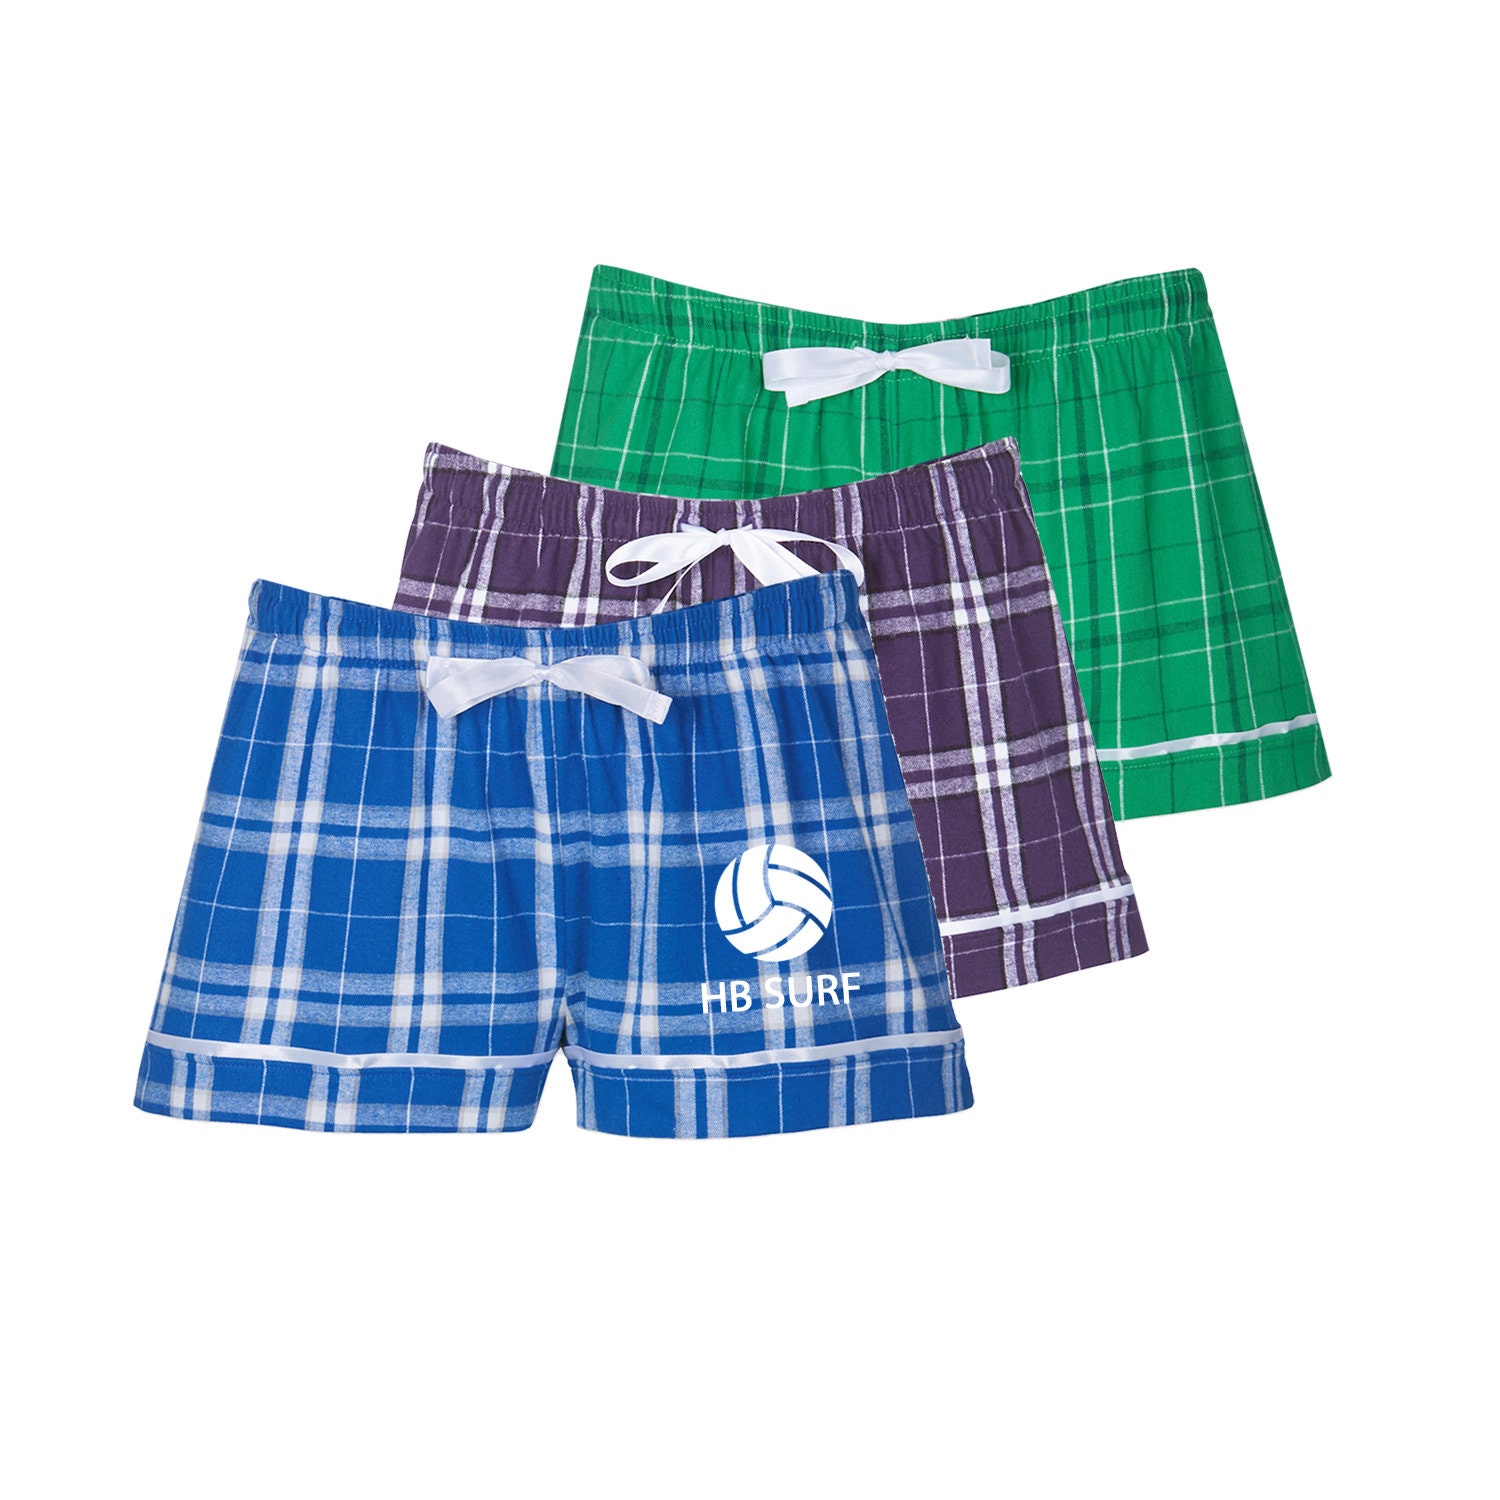 Monogrammed Boxers / Women's Boxer Shorts / Personalized Plaid